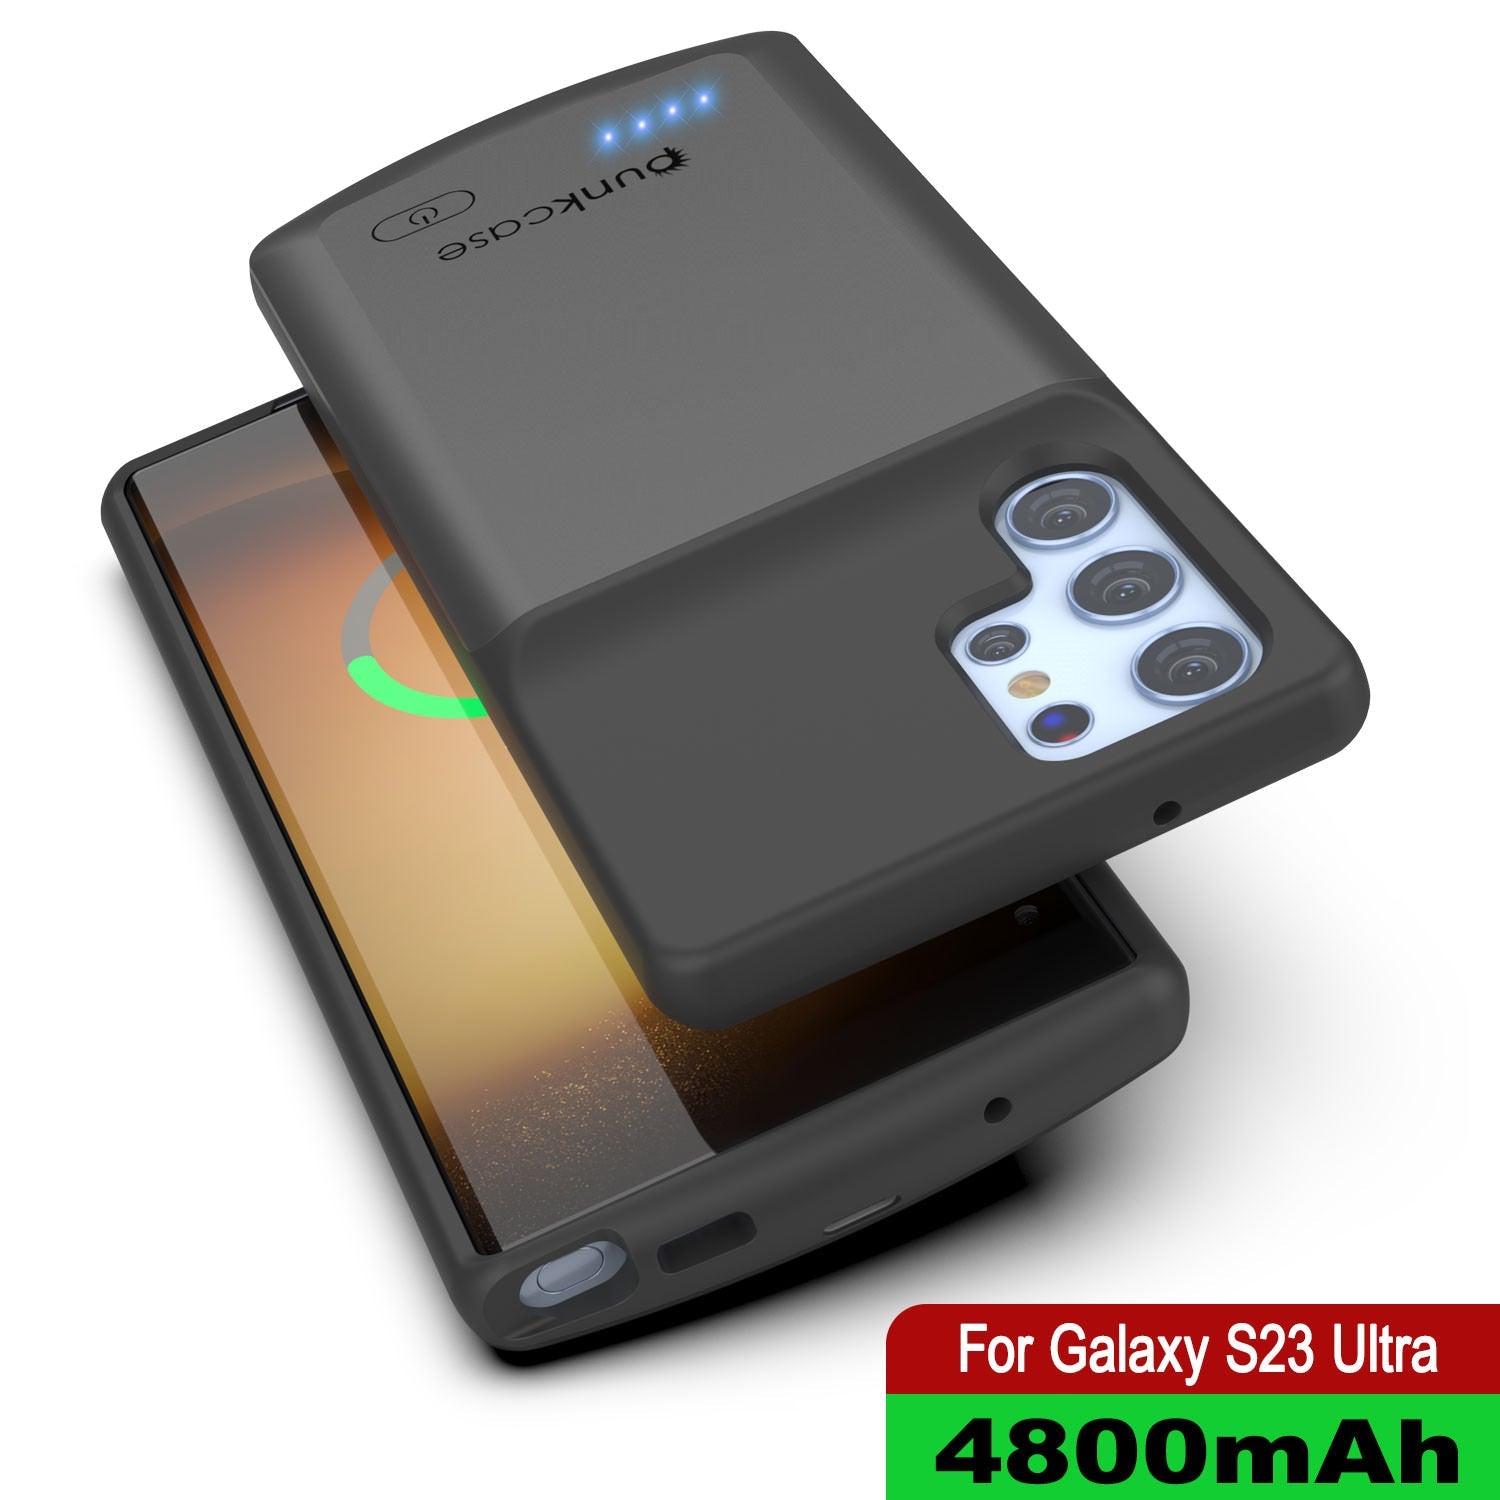 PunkJuice S24 Ultra Battery Case Grey - Portable Charging Power Juice Bank with 4500mAh